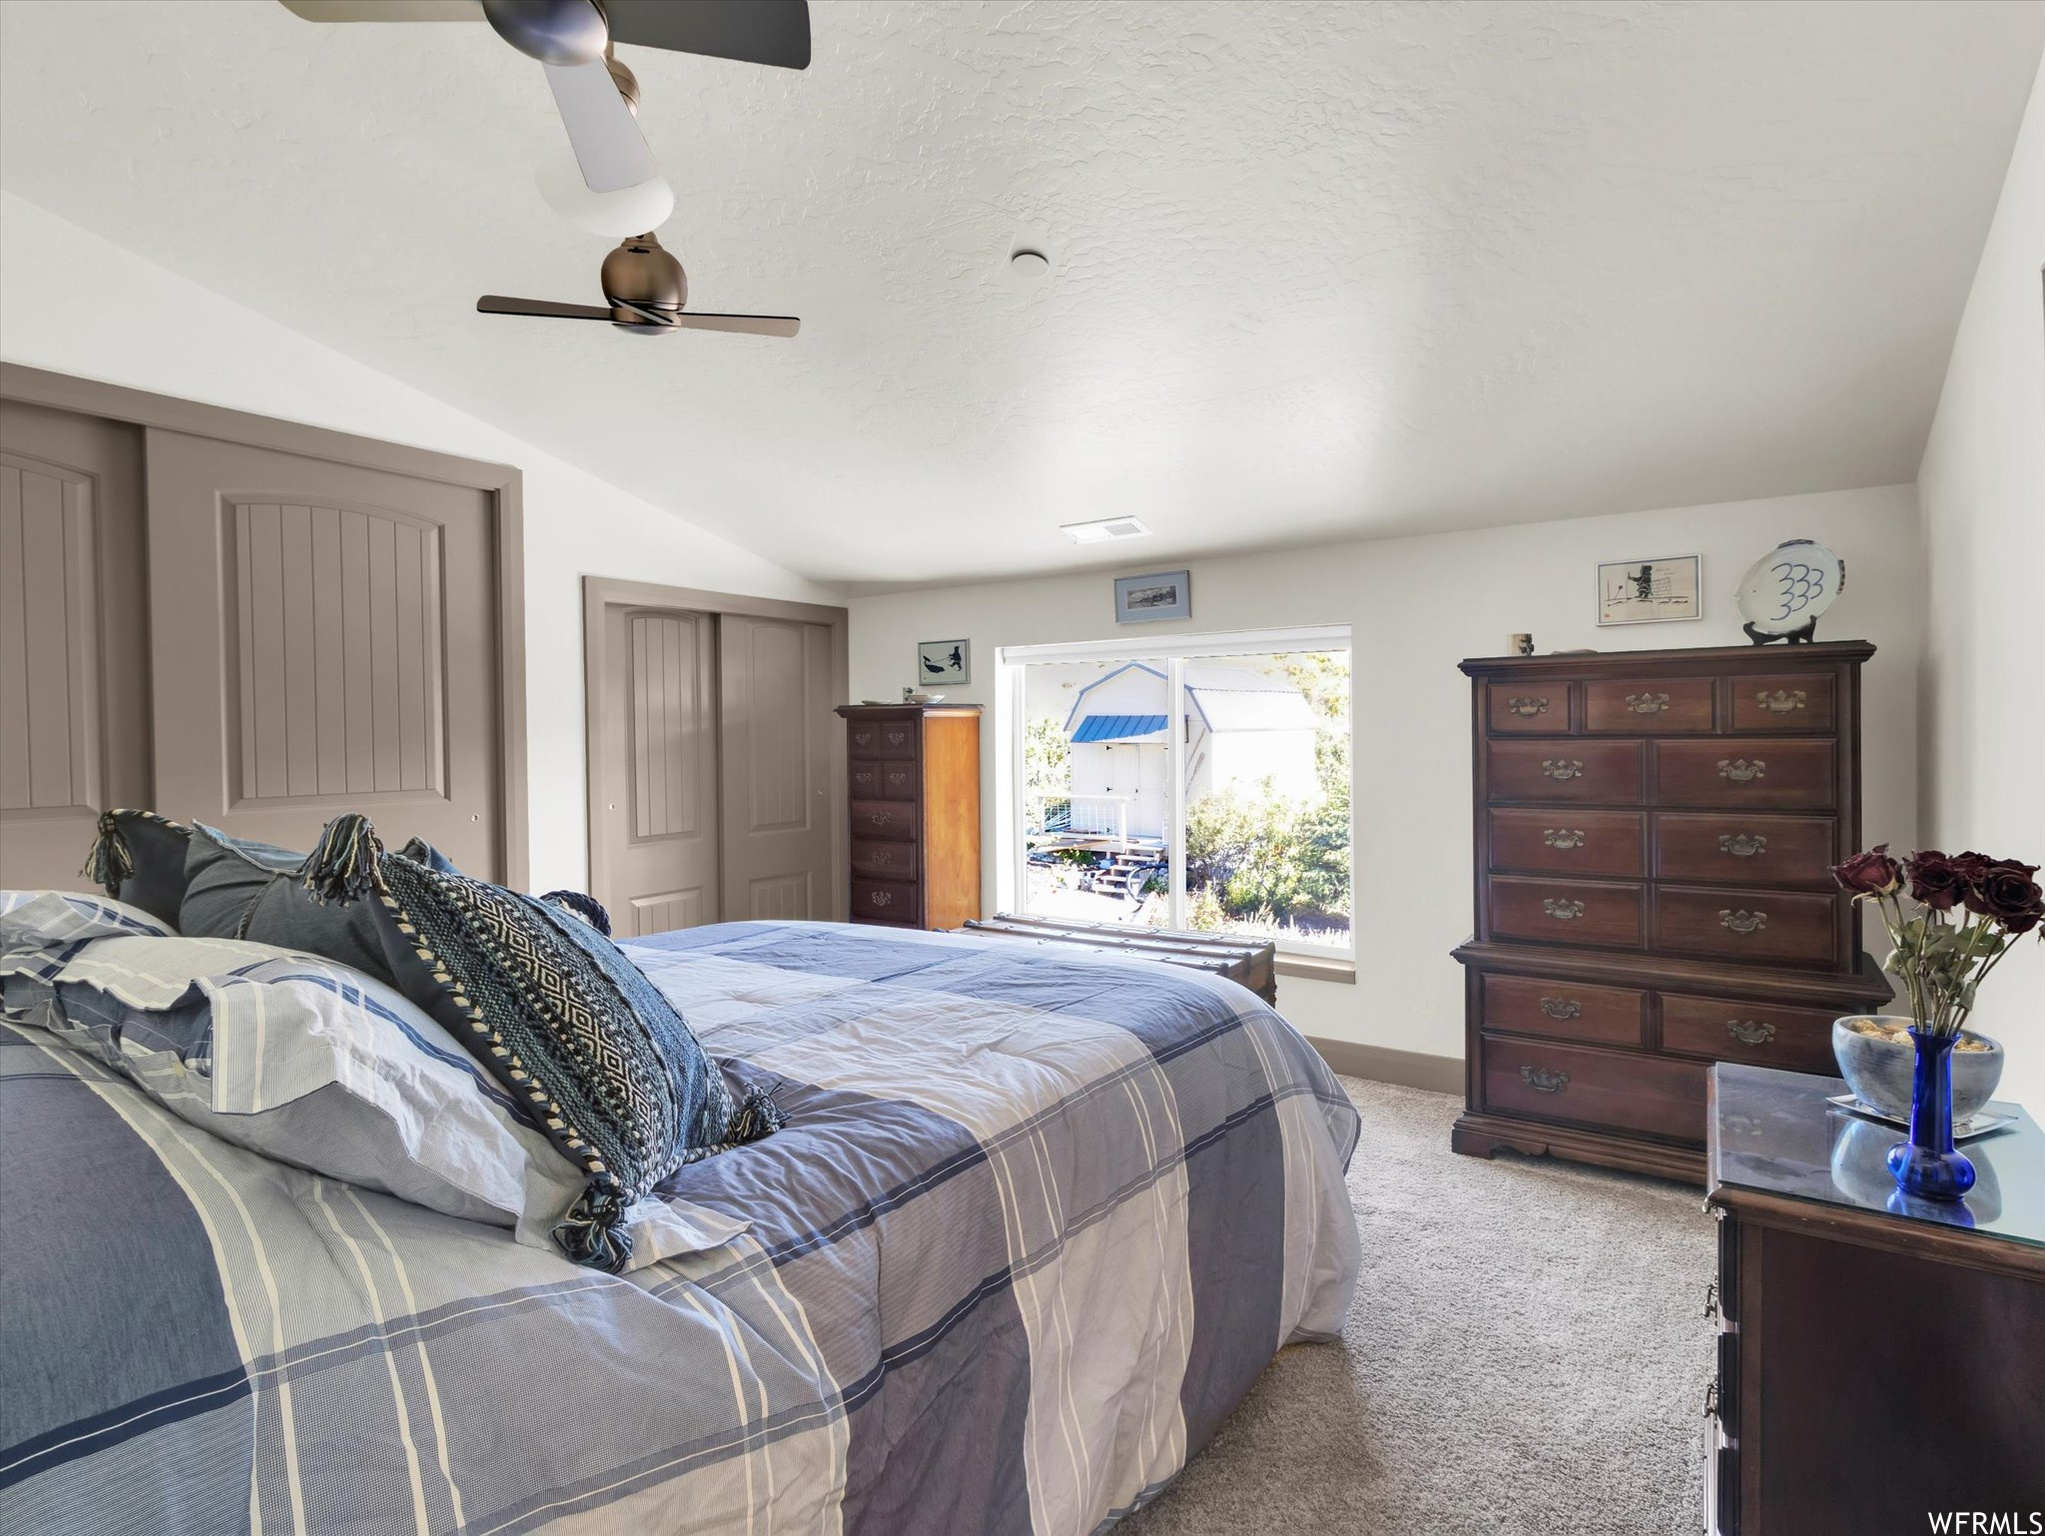 Carpeted bedroom with vaulted ceiling, a closet, and ceiling fan